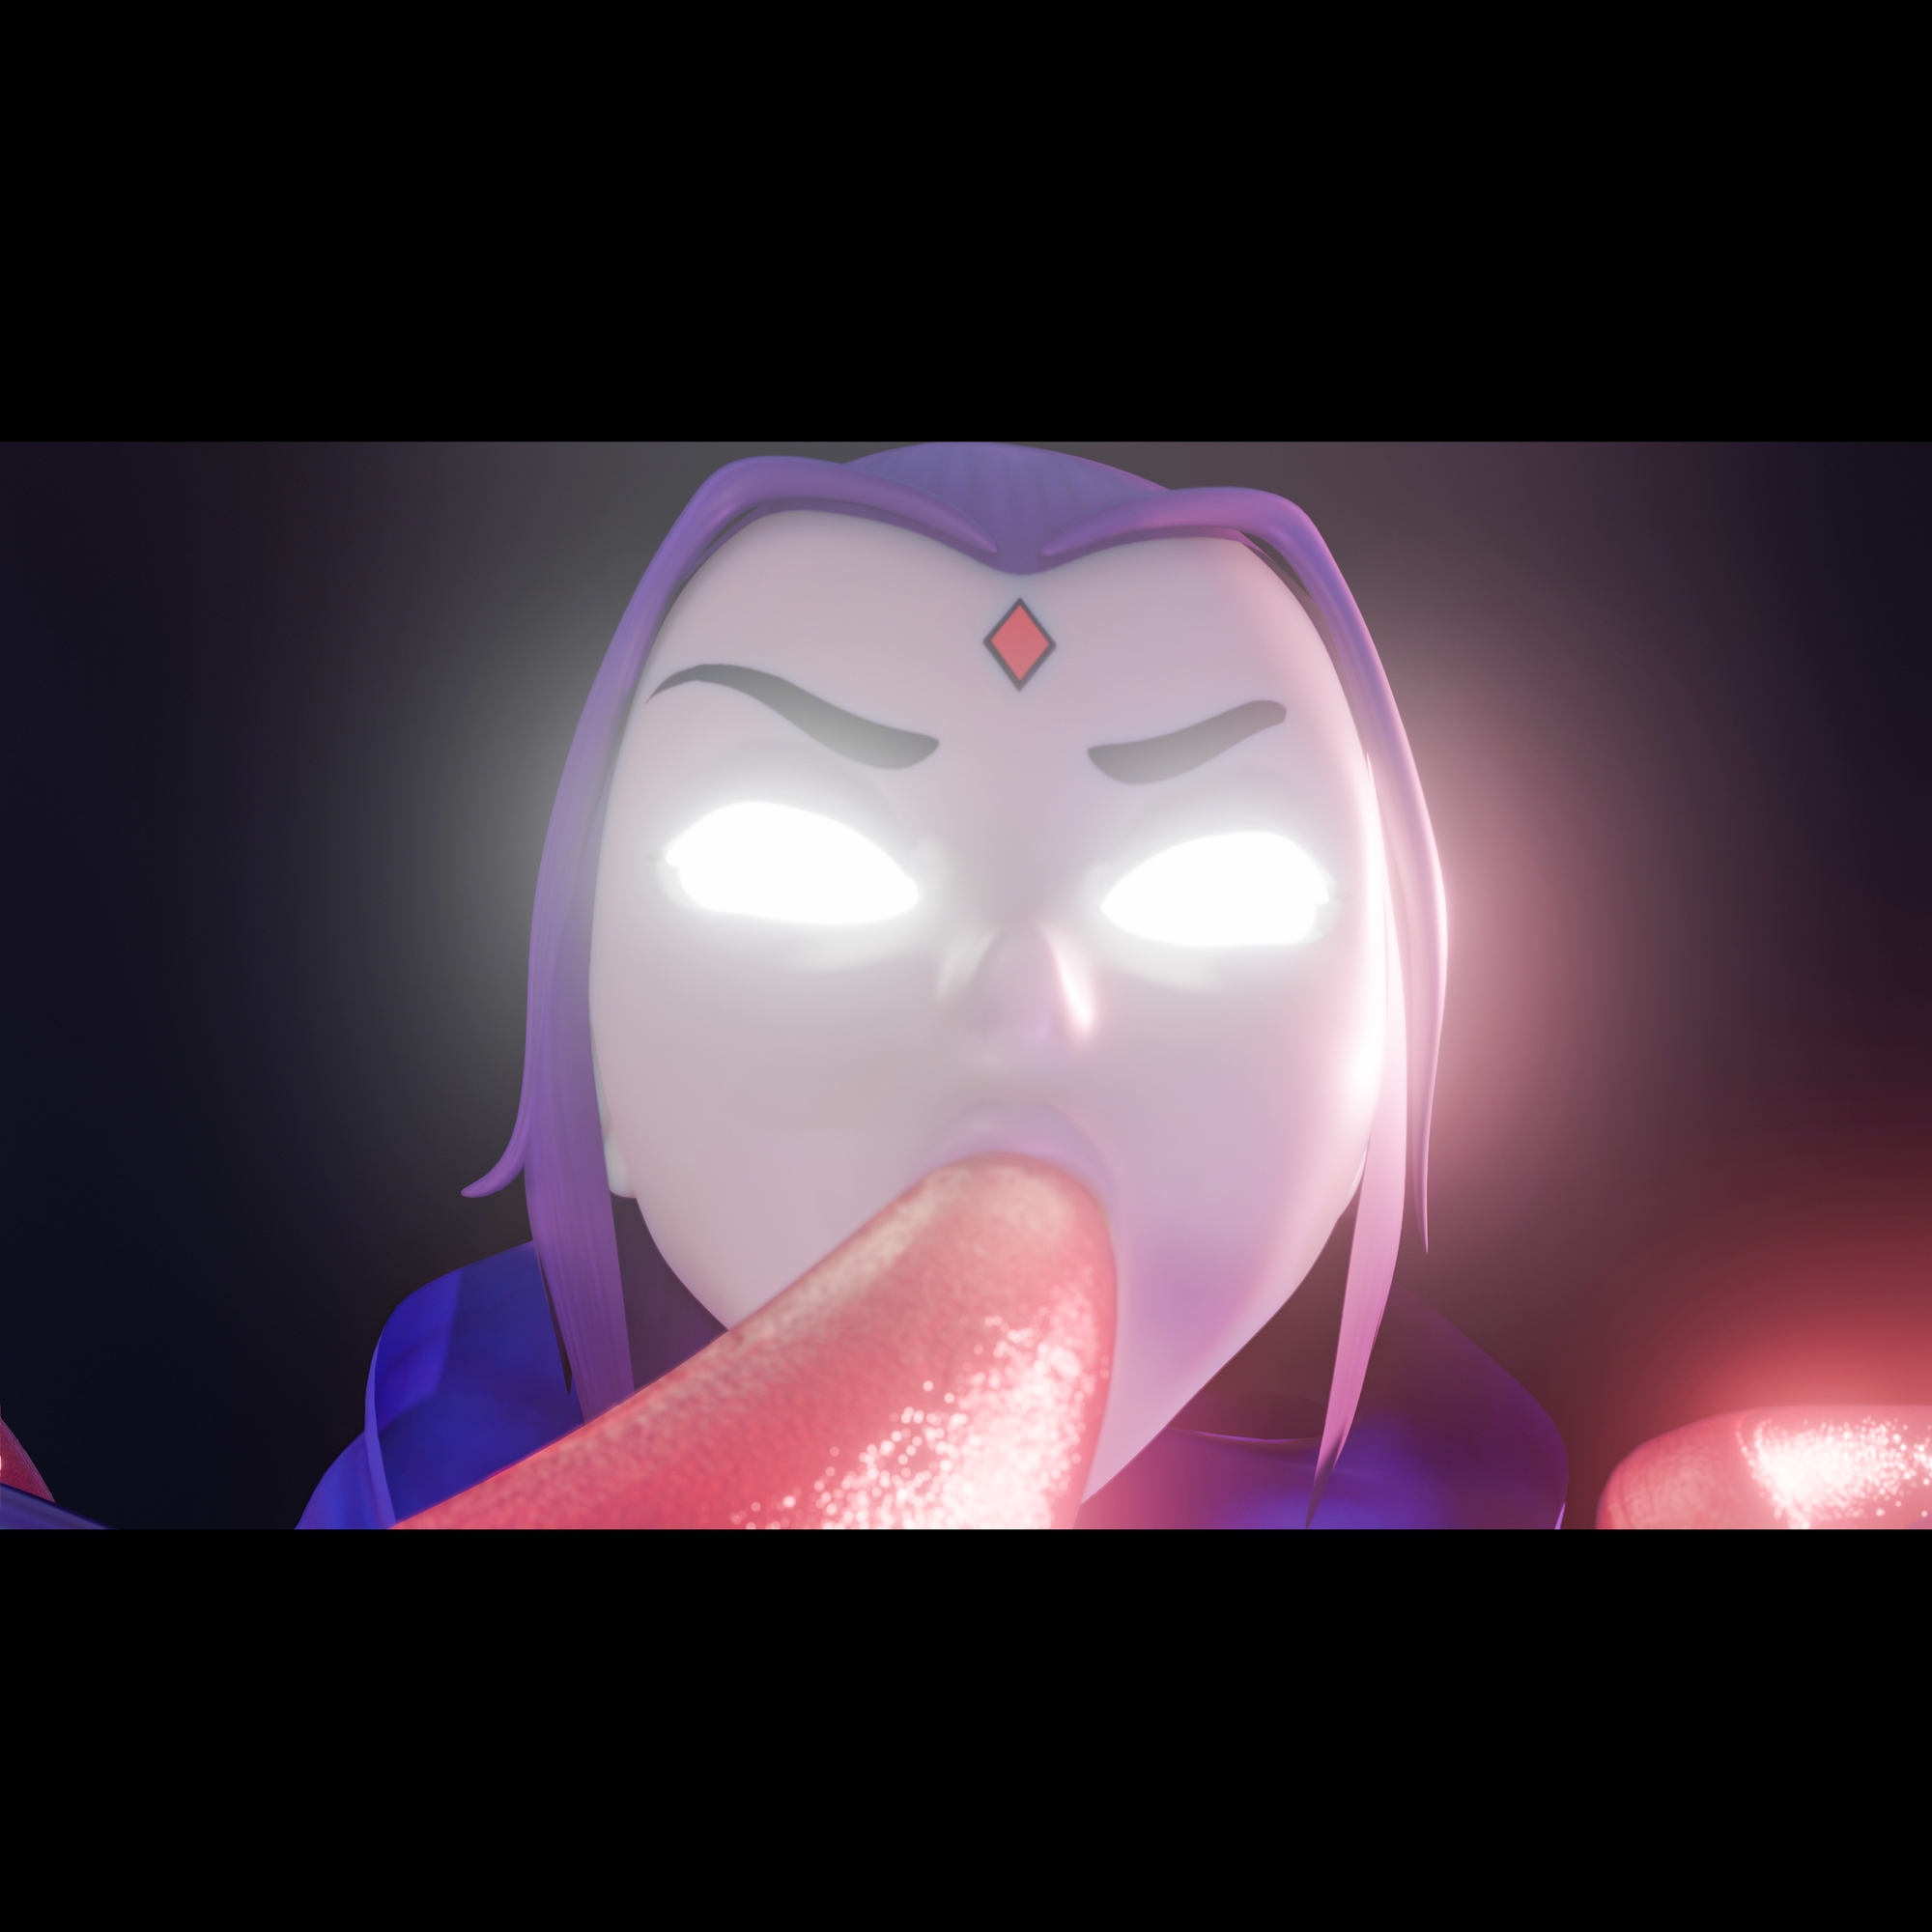 Raven tentacled Raven (teen Titans) Tentacles Cum Cum Inflation All The Way Through 19